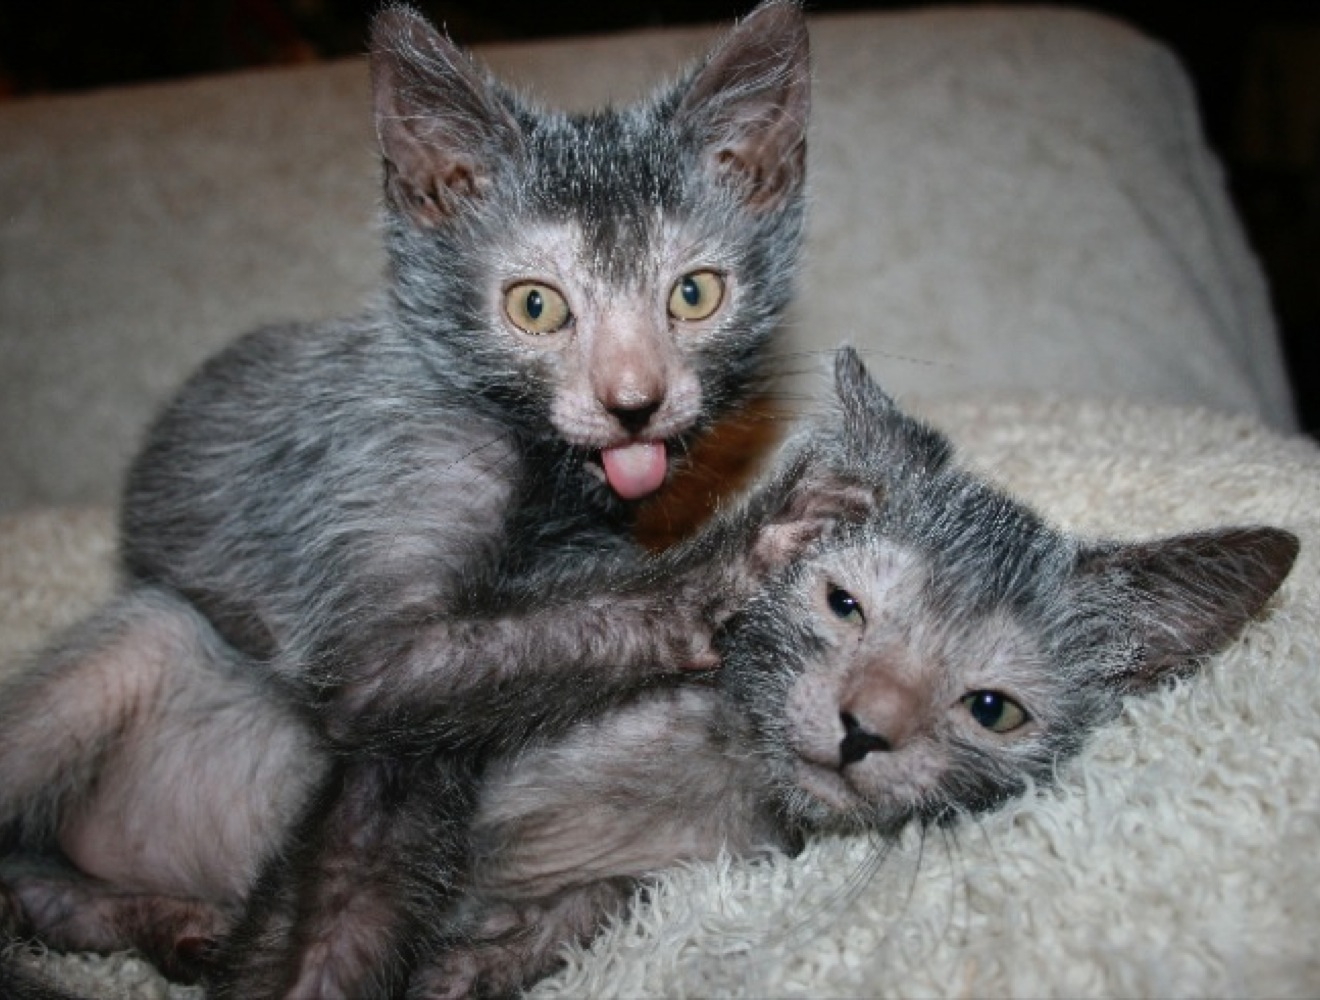 Distinctive balding patterns make Lykoi cats truly unique in appearance.